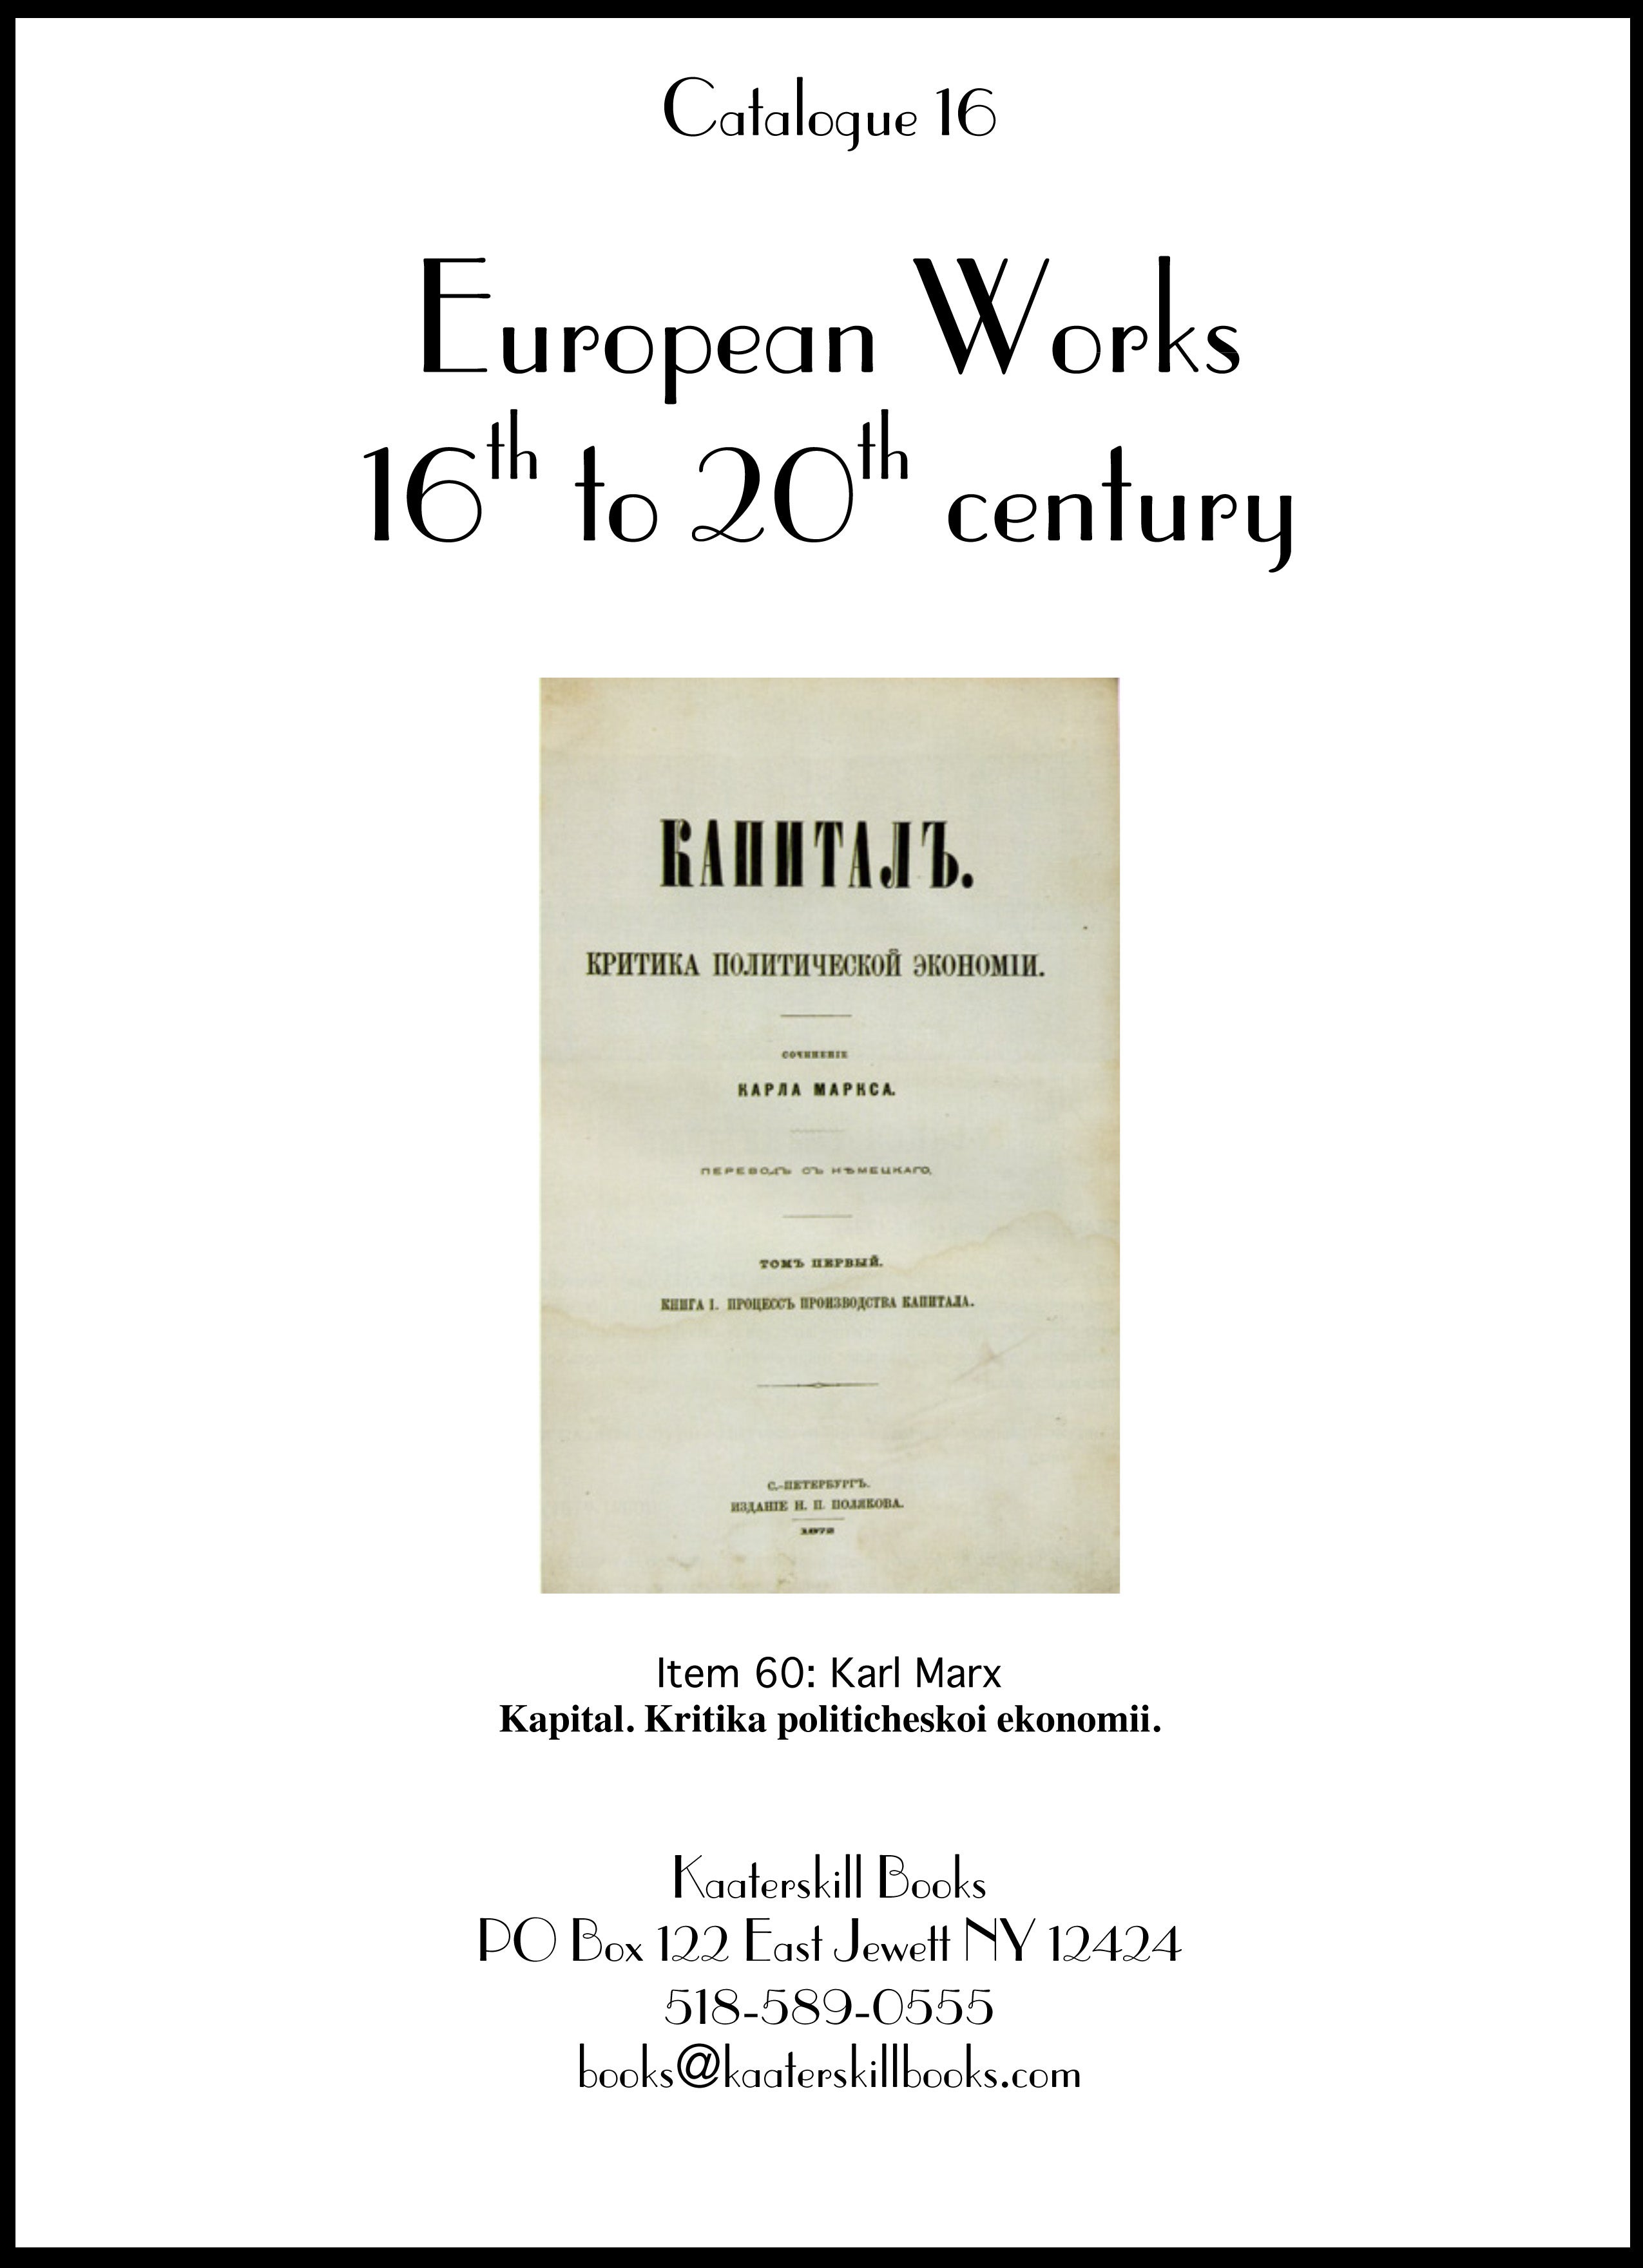 Catalogue 16: European Works - 16th to 20th century